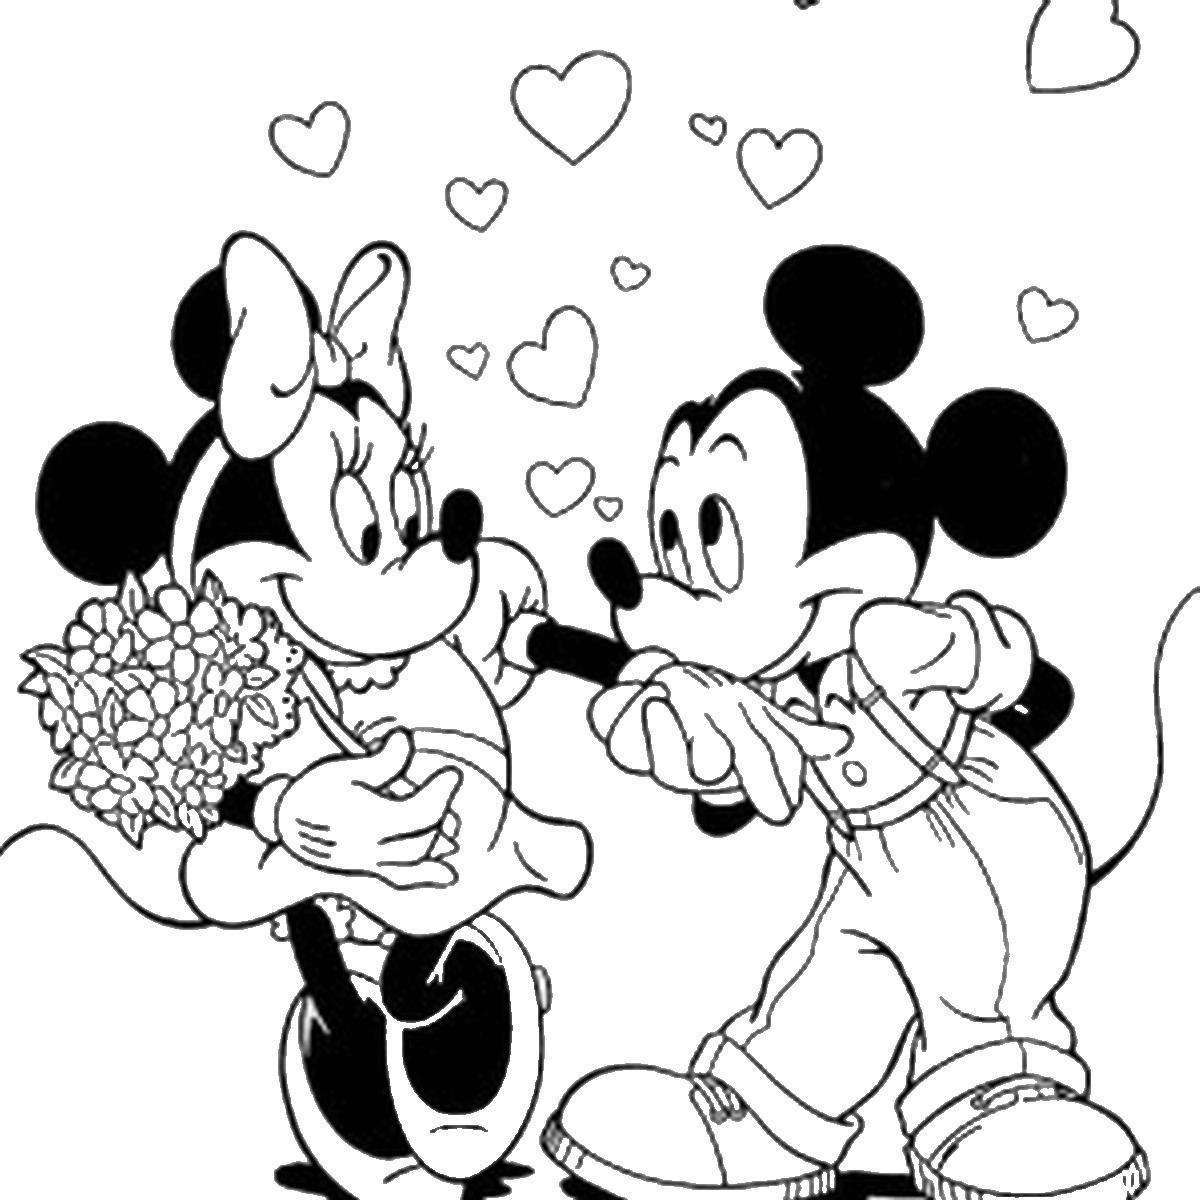 Valentines Day Free Printable Coloring Pages at GetDrawings Free download